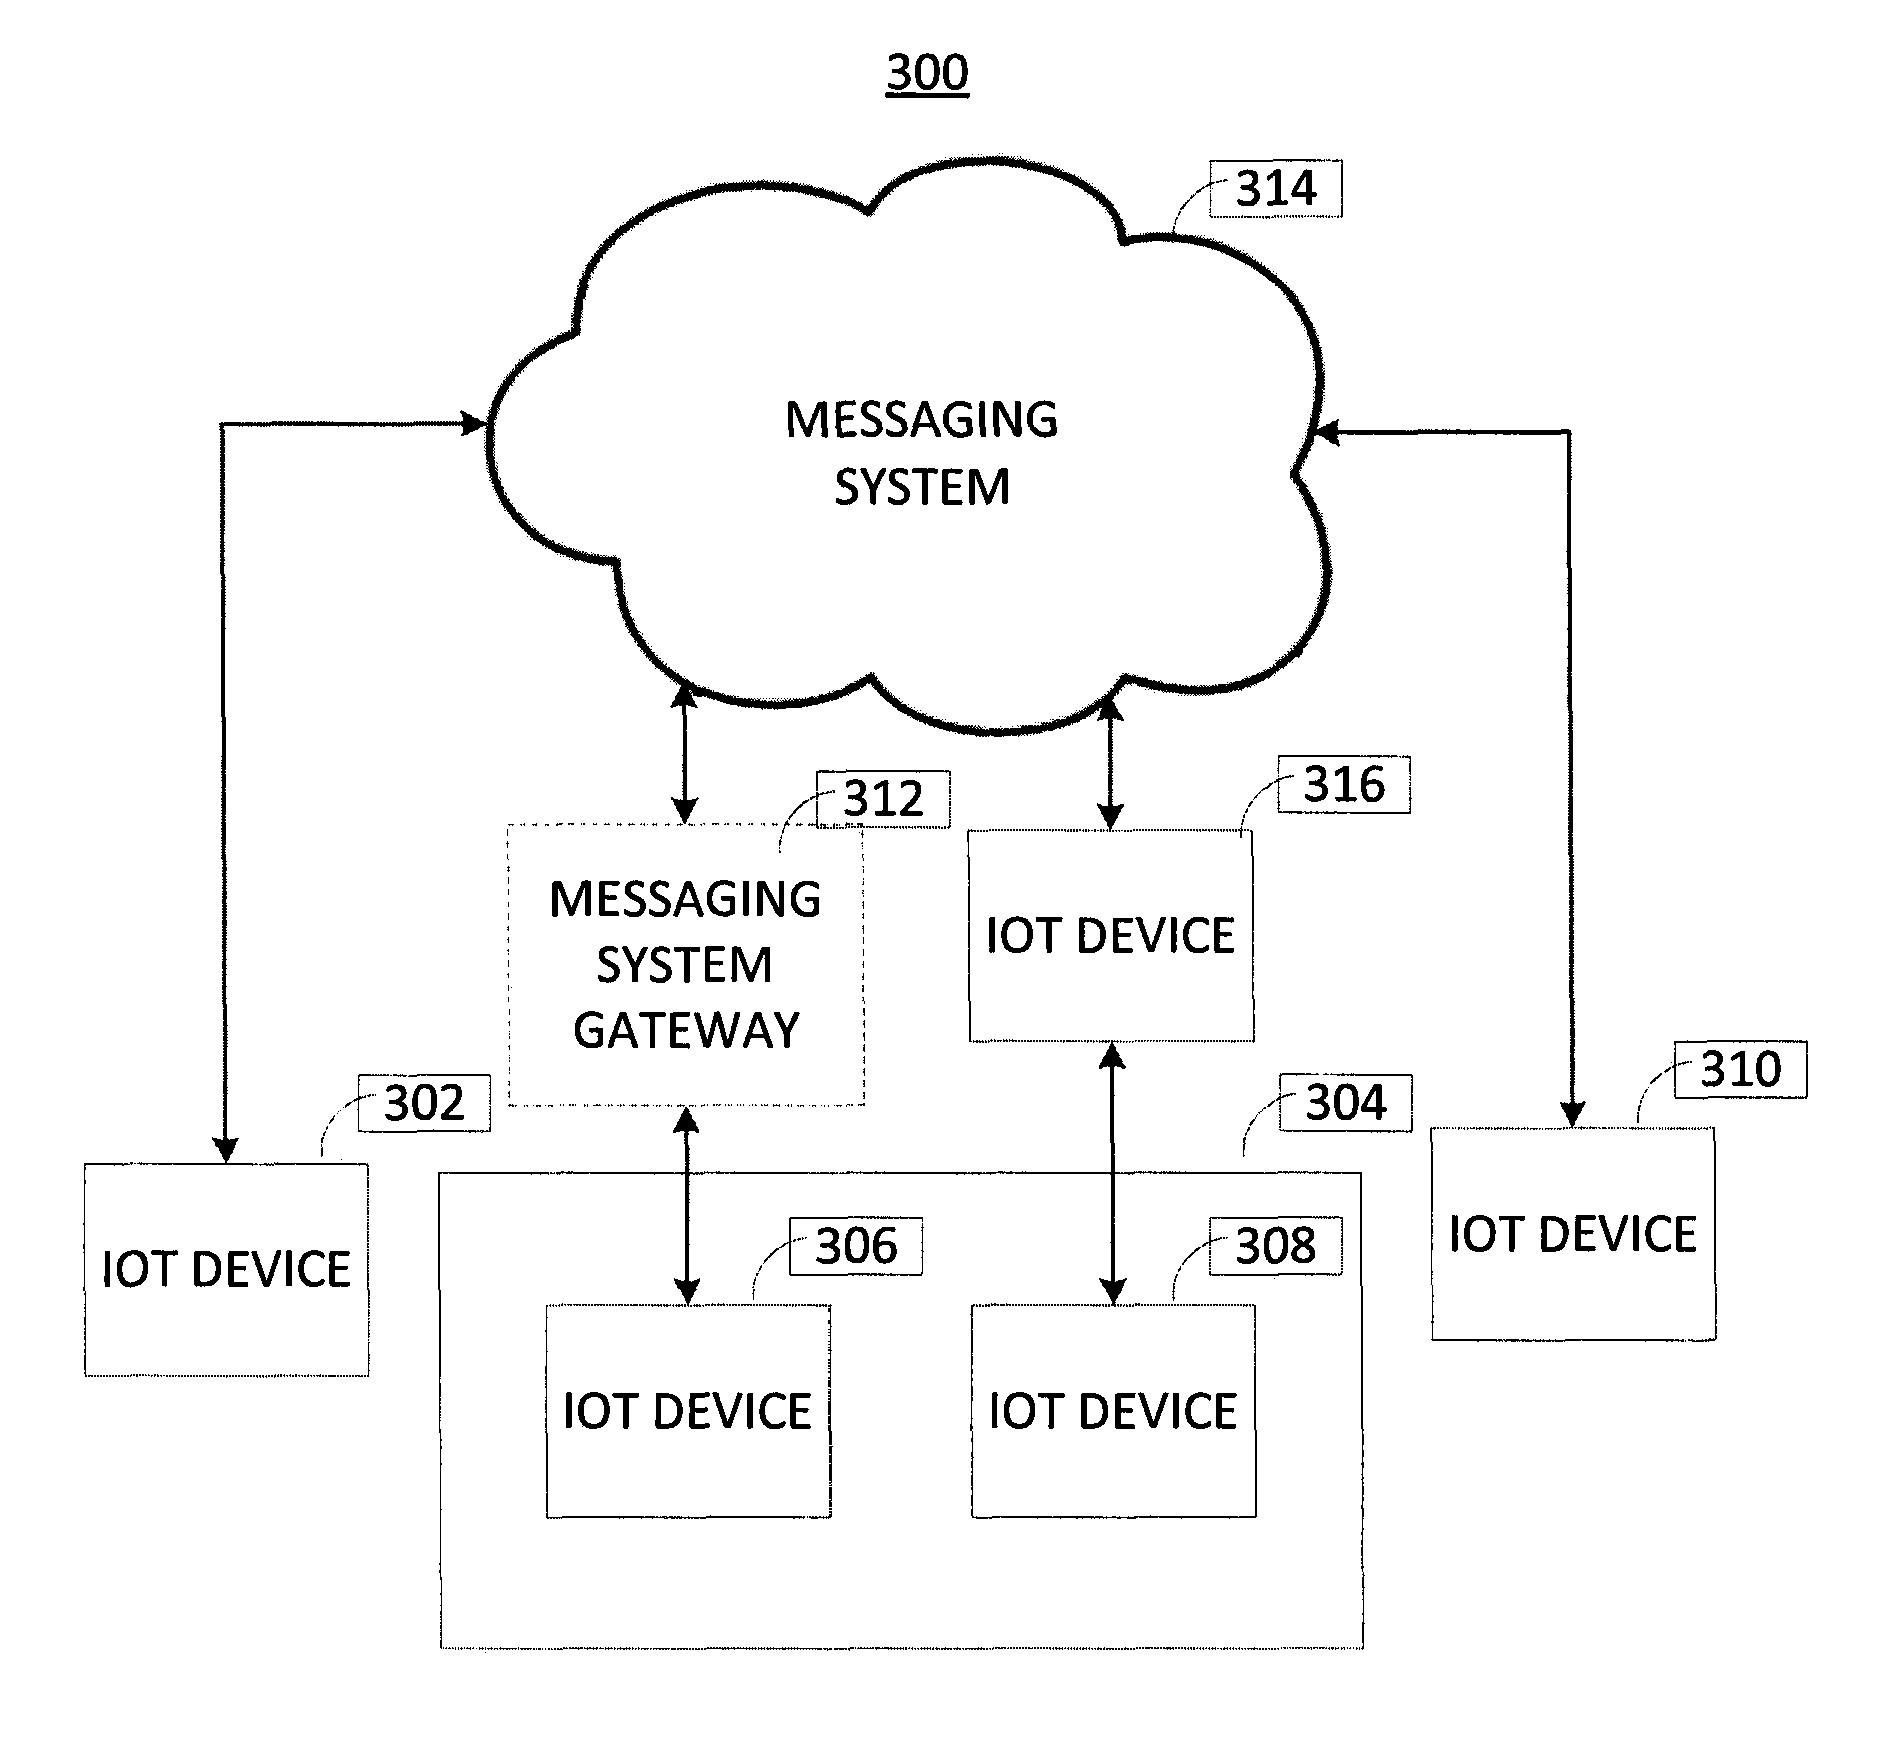 Location assistance in a machine to machine instant messaging system